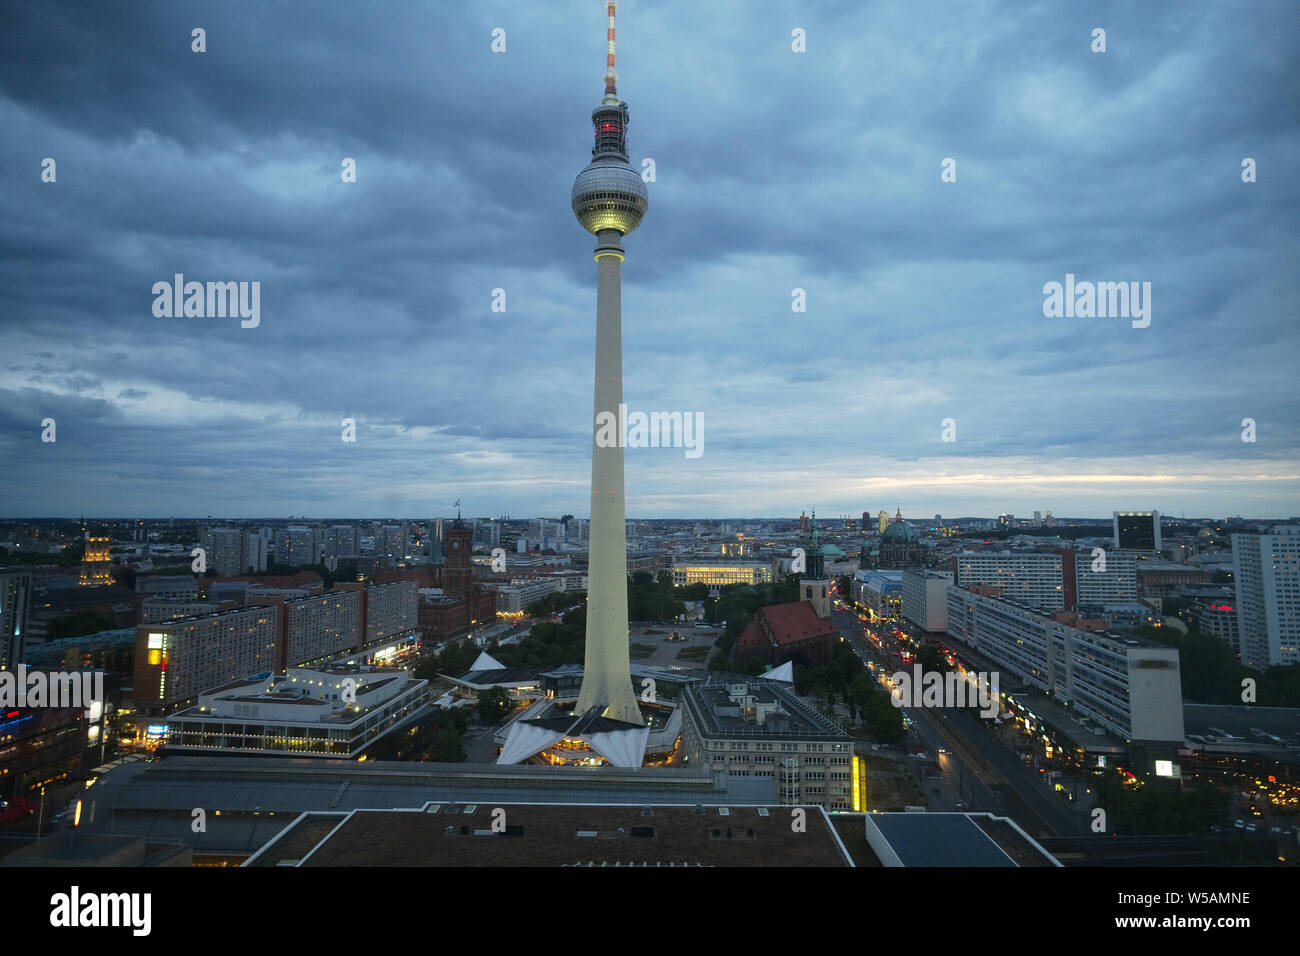 The Berlin TV Tower, 205 metres high built by the German Democratic Republic (East Germany) in the Alexanderplatz area of Berlin Stock Photo